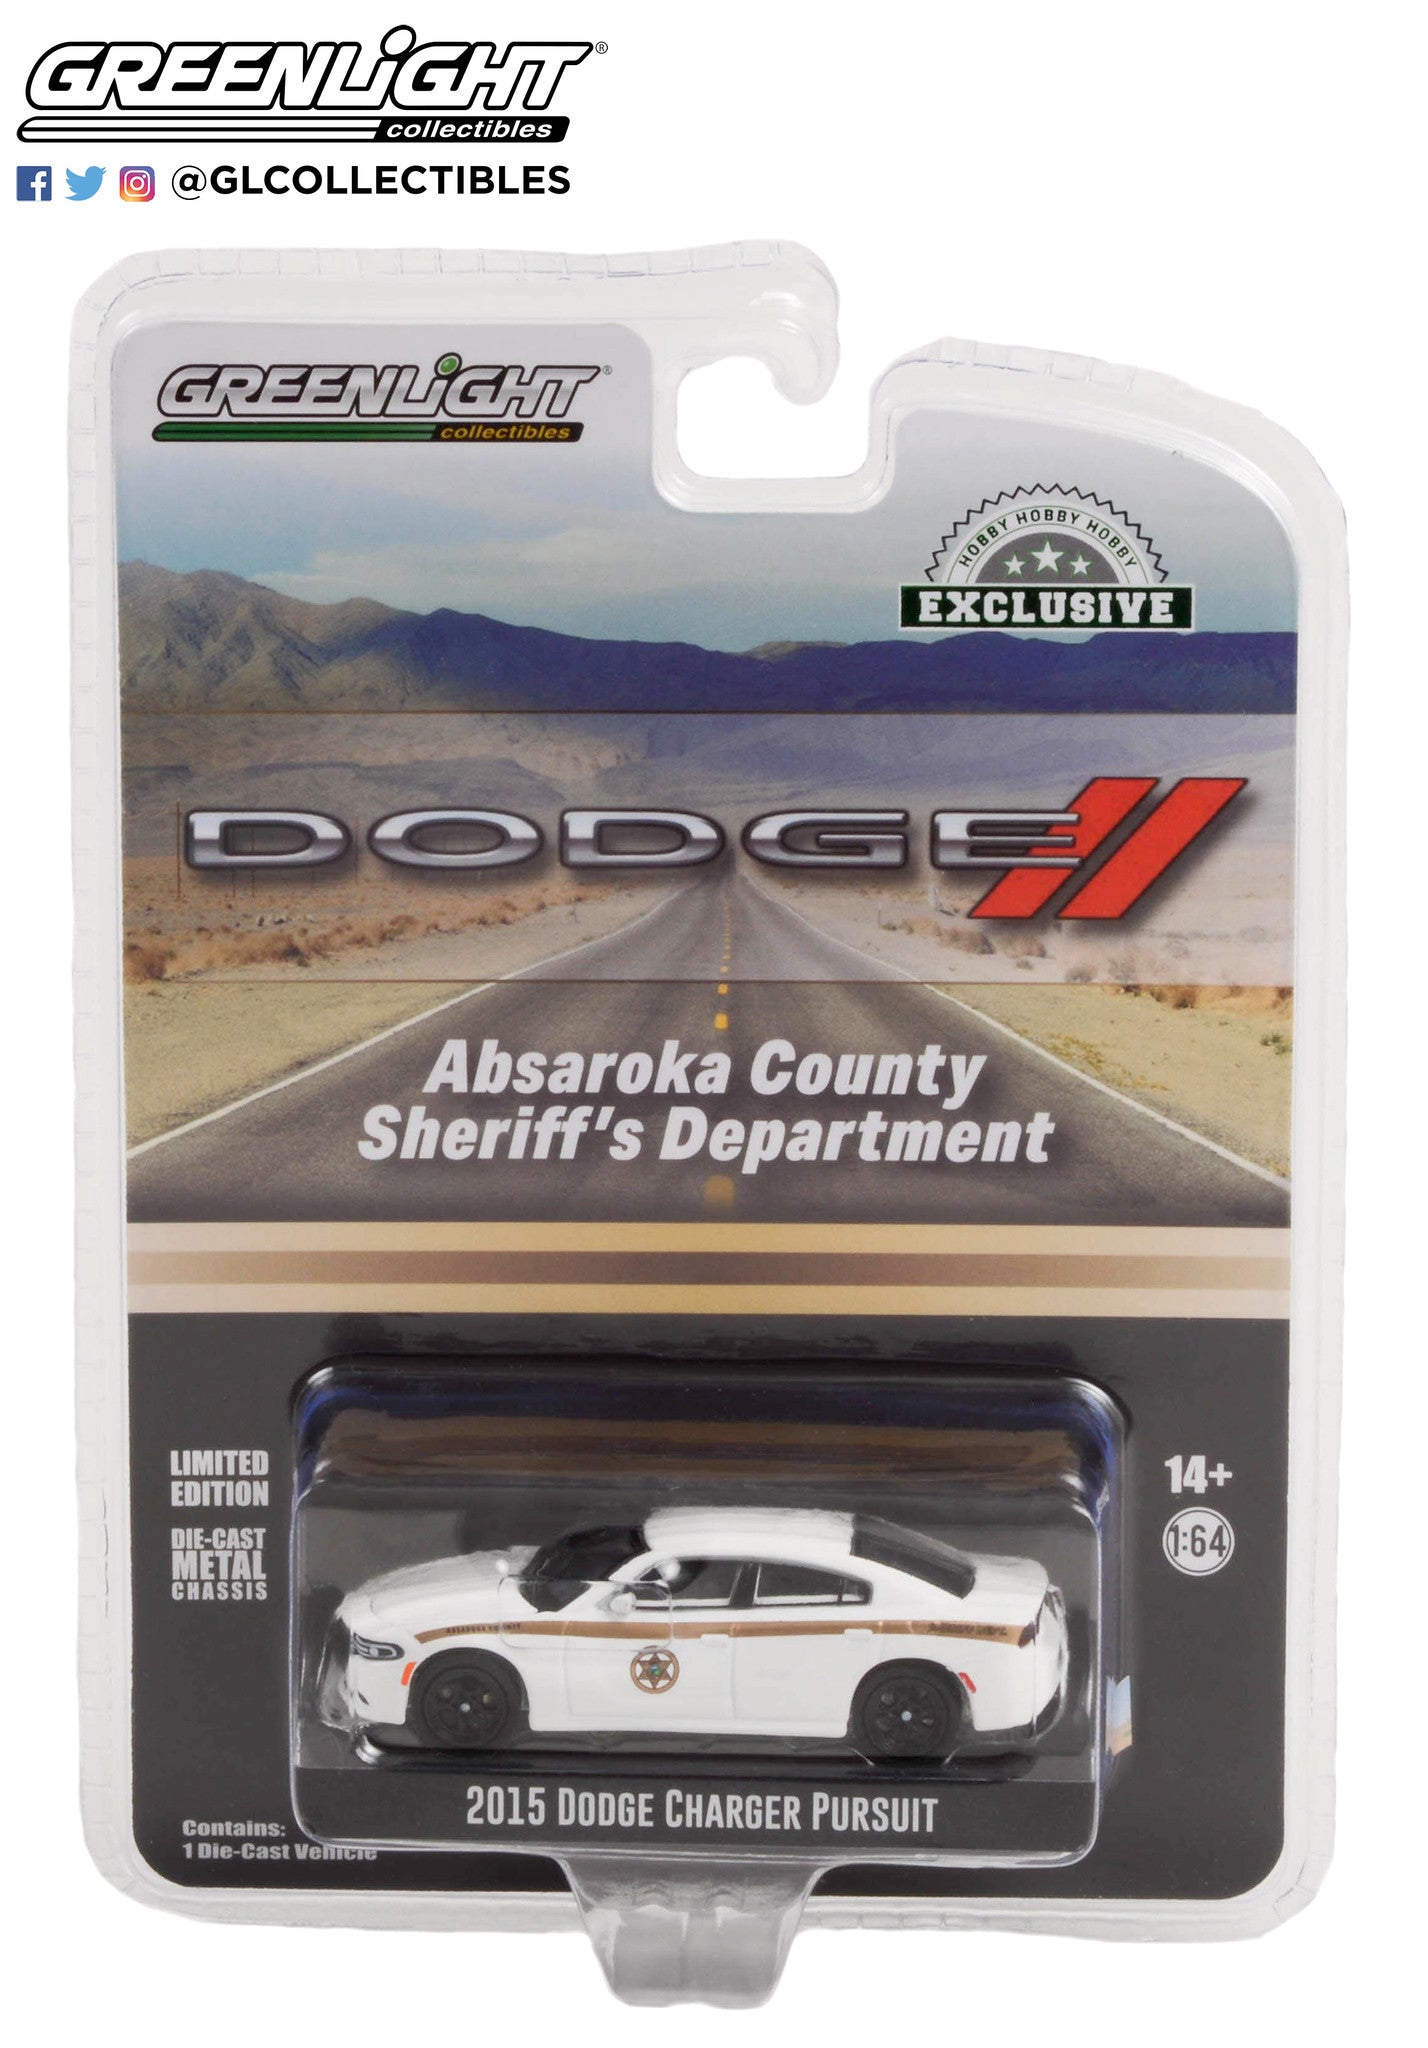 GreenLight 1:64 2015 Dodge Charger Pursuit - Absaroka County Sheriff's Department 30335